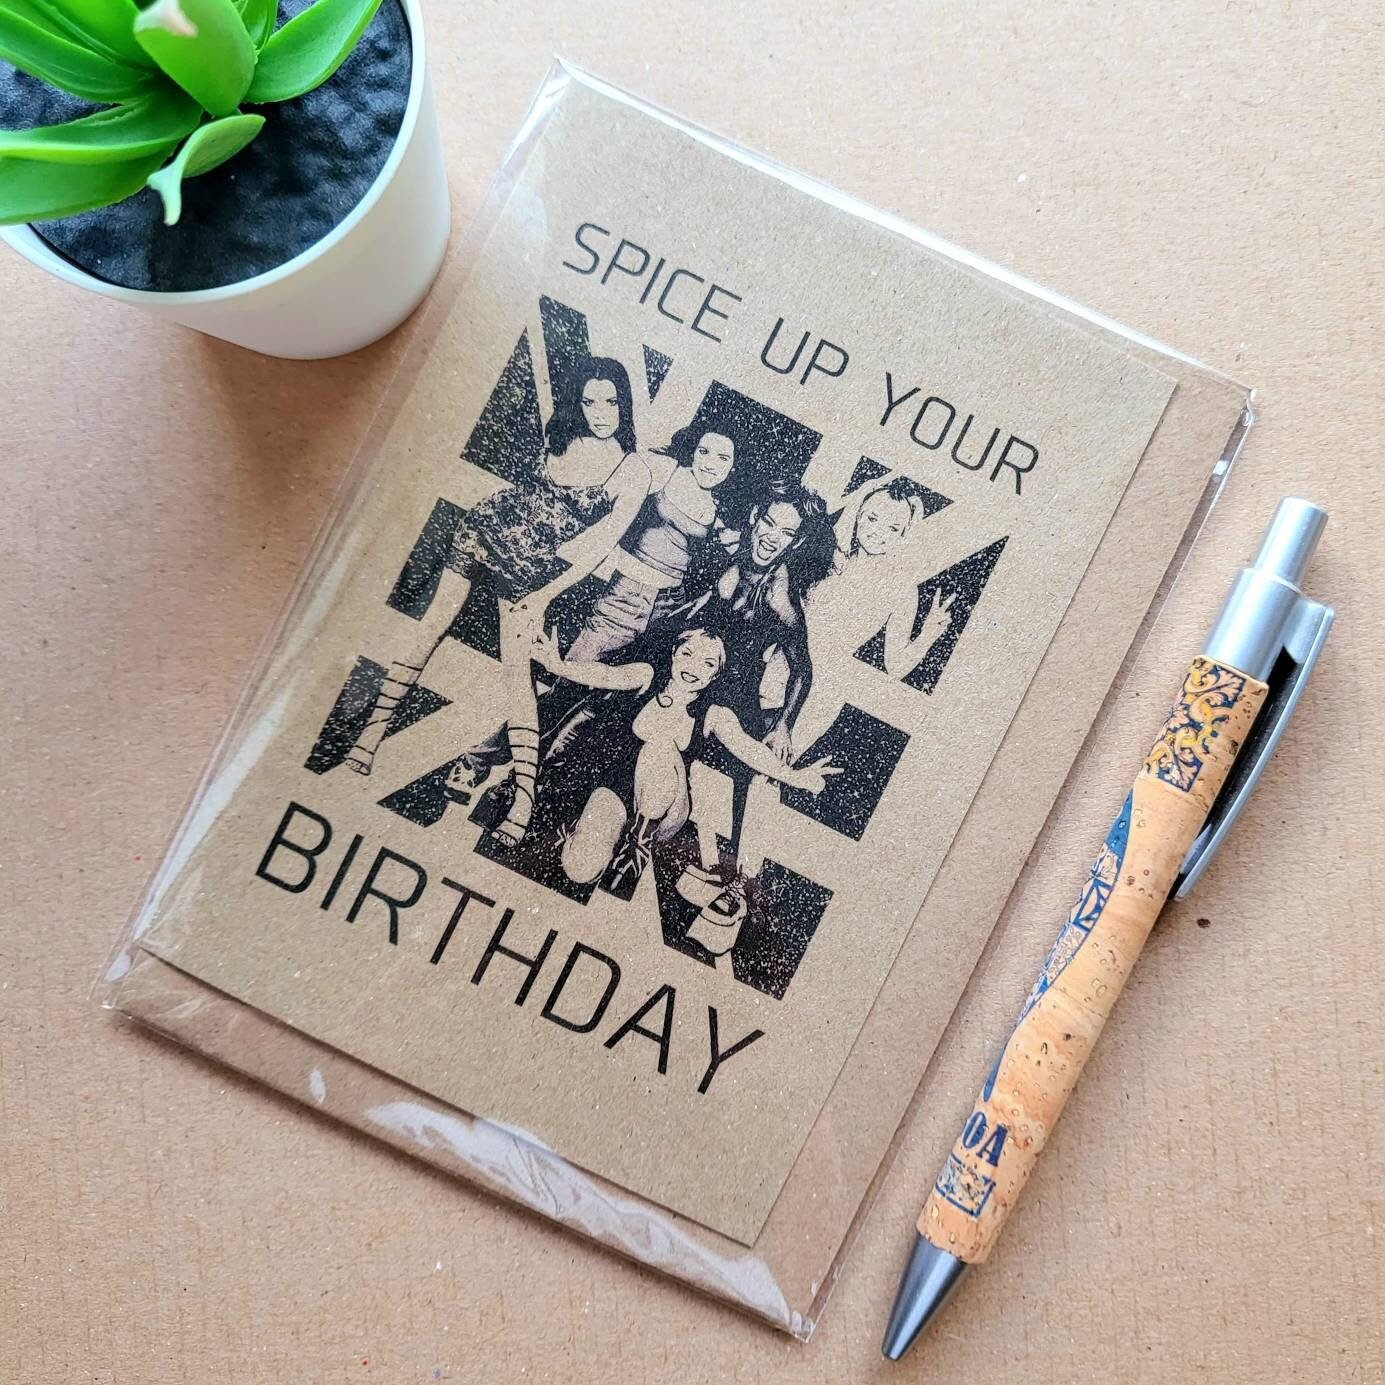 Funny Spice girls Birthday Card - Spice up your Birthday!